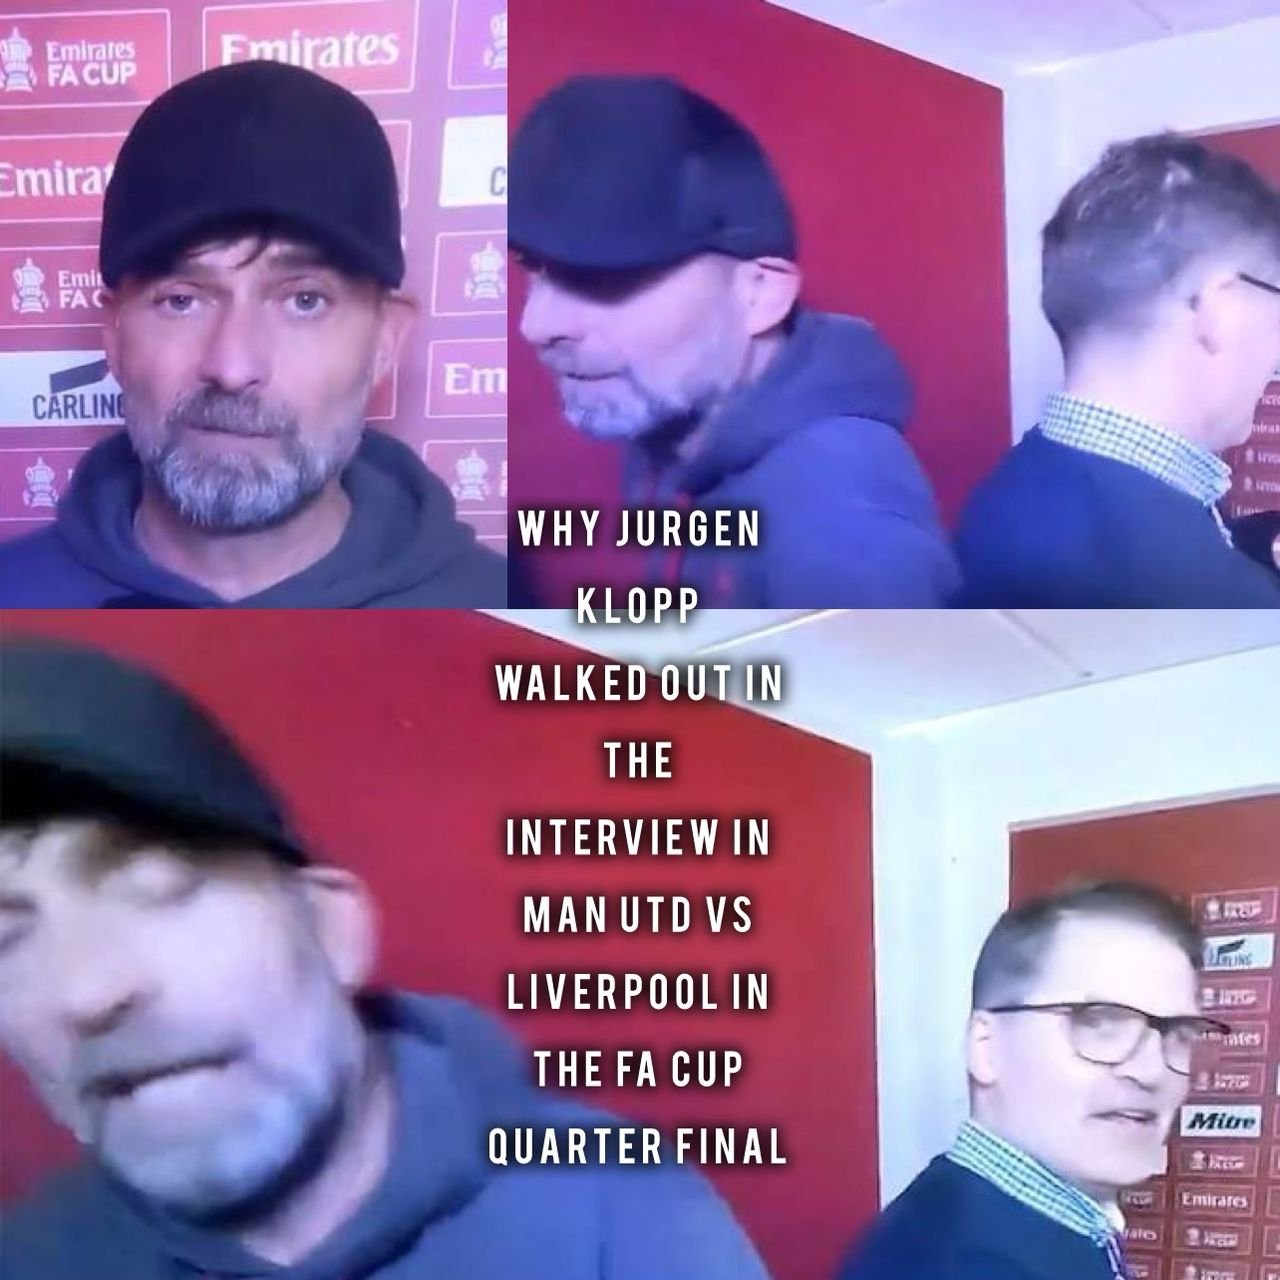 The major reason Liverpool coach Jurgen Klopp walk out angrily from the interview after Manchester United win (4) vs Liverpool (3) in FA Cup quarter final